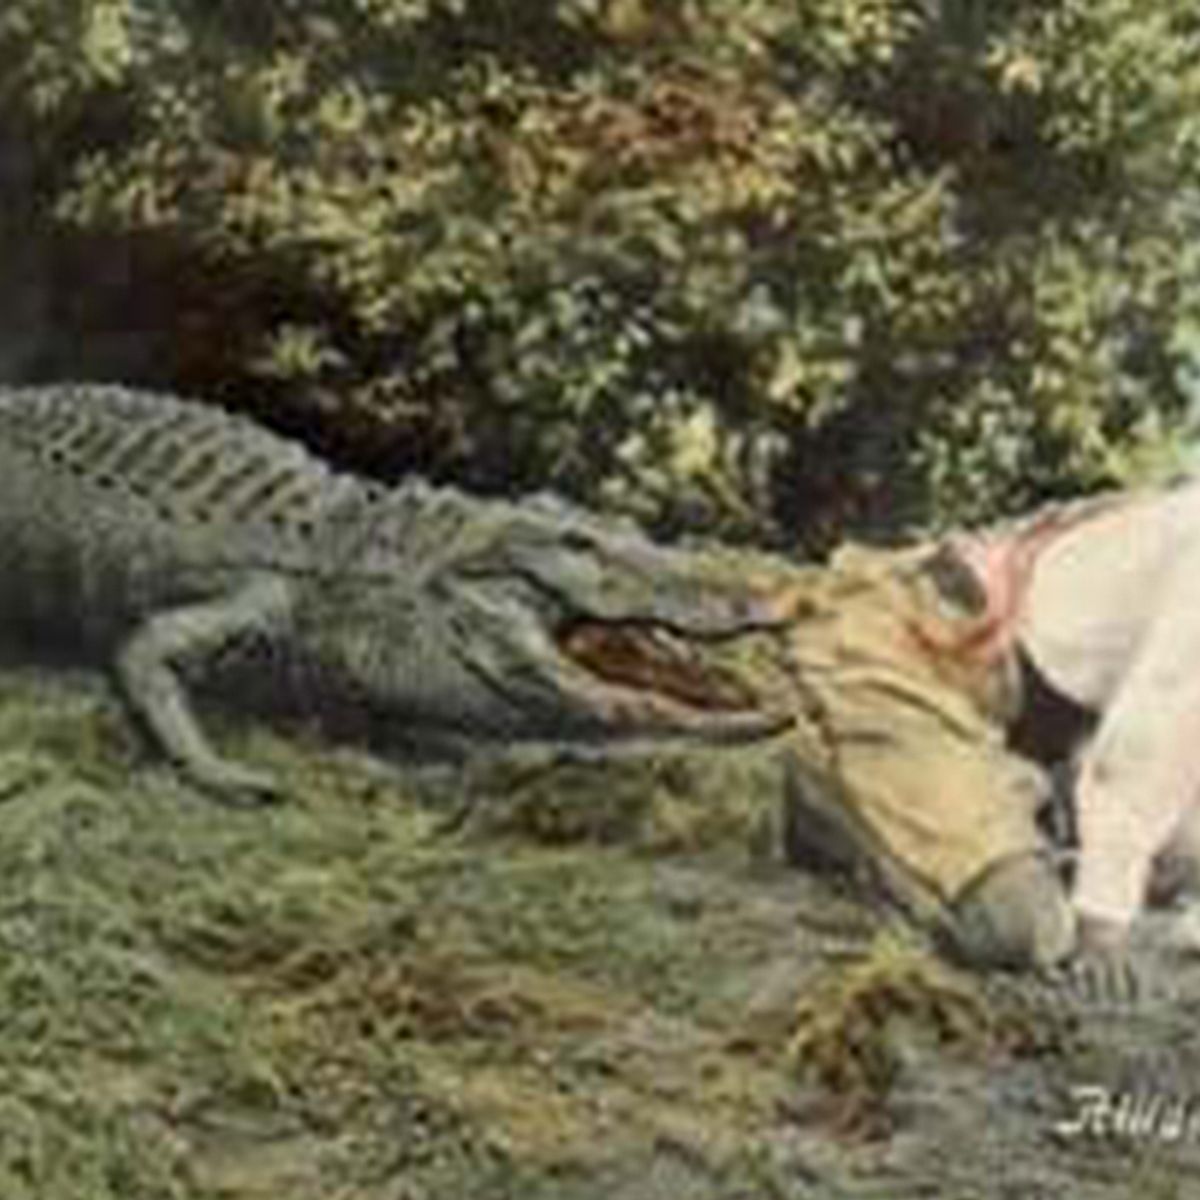 Were Black Children Used as Alligator Bait in the American South?